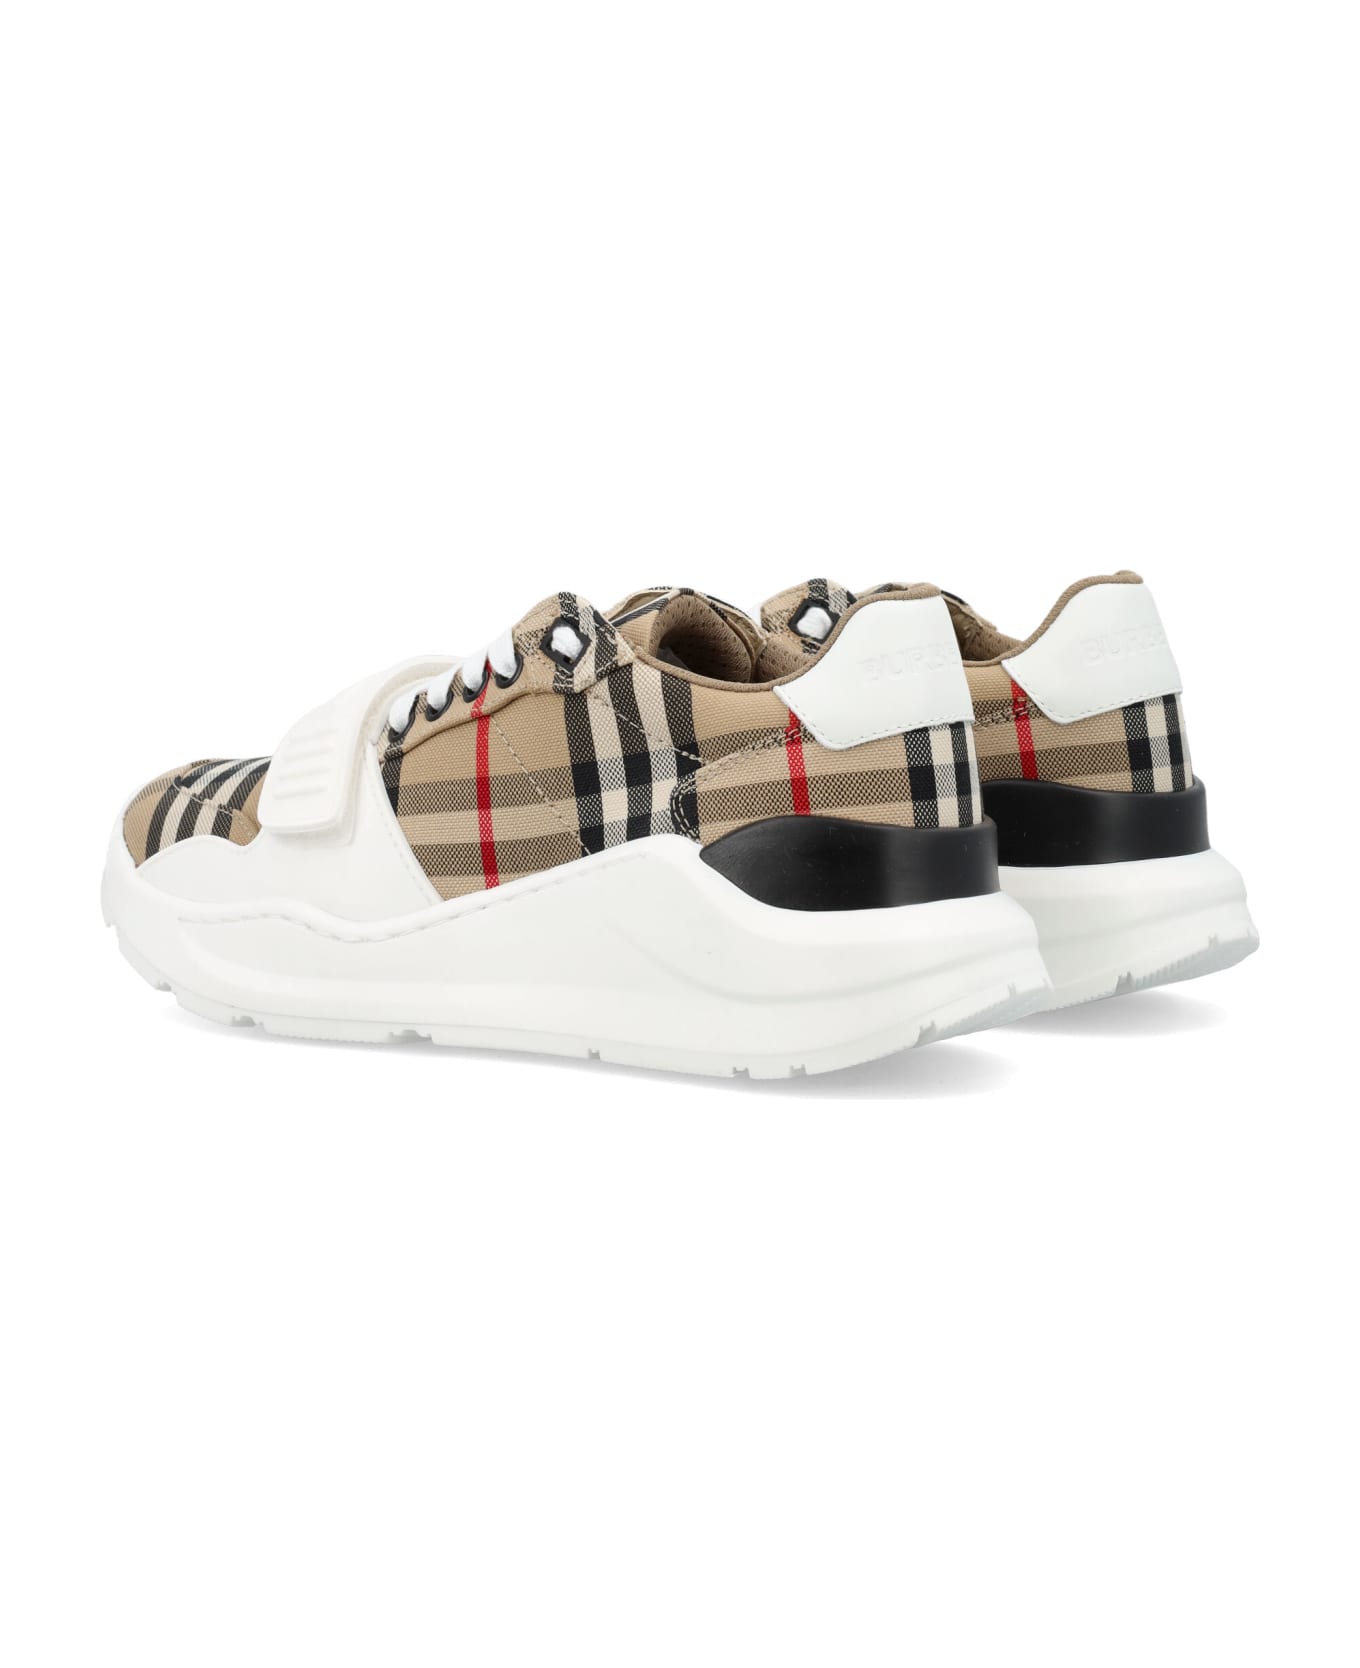 Burberry London Check Sneakers - ARCHIVE BEIGE IP CHK スニーカー